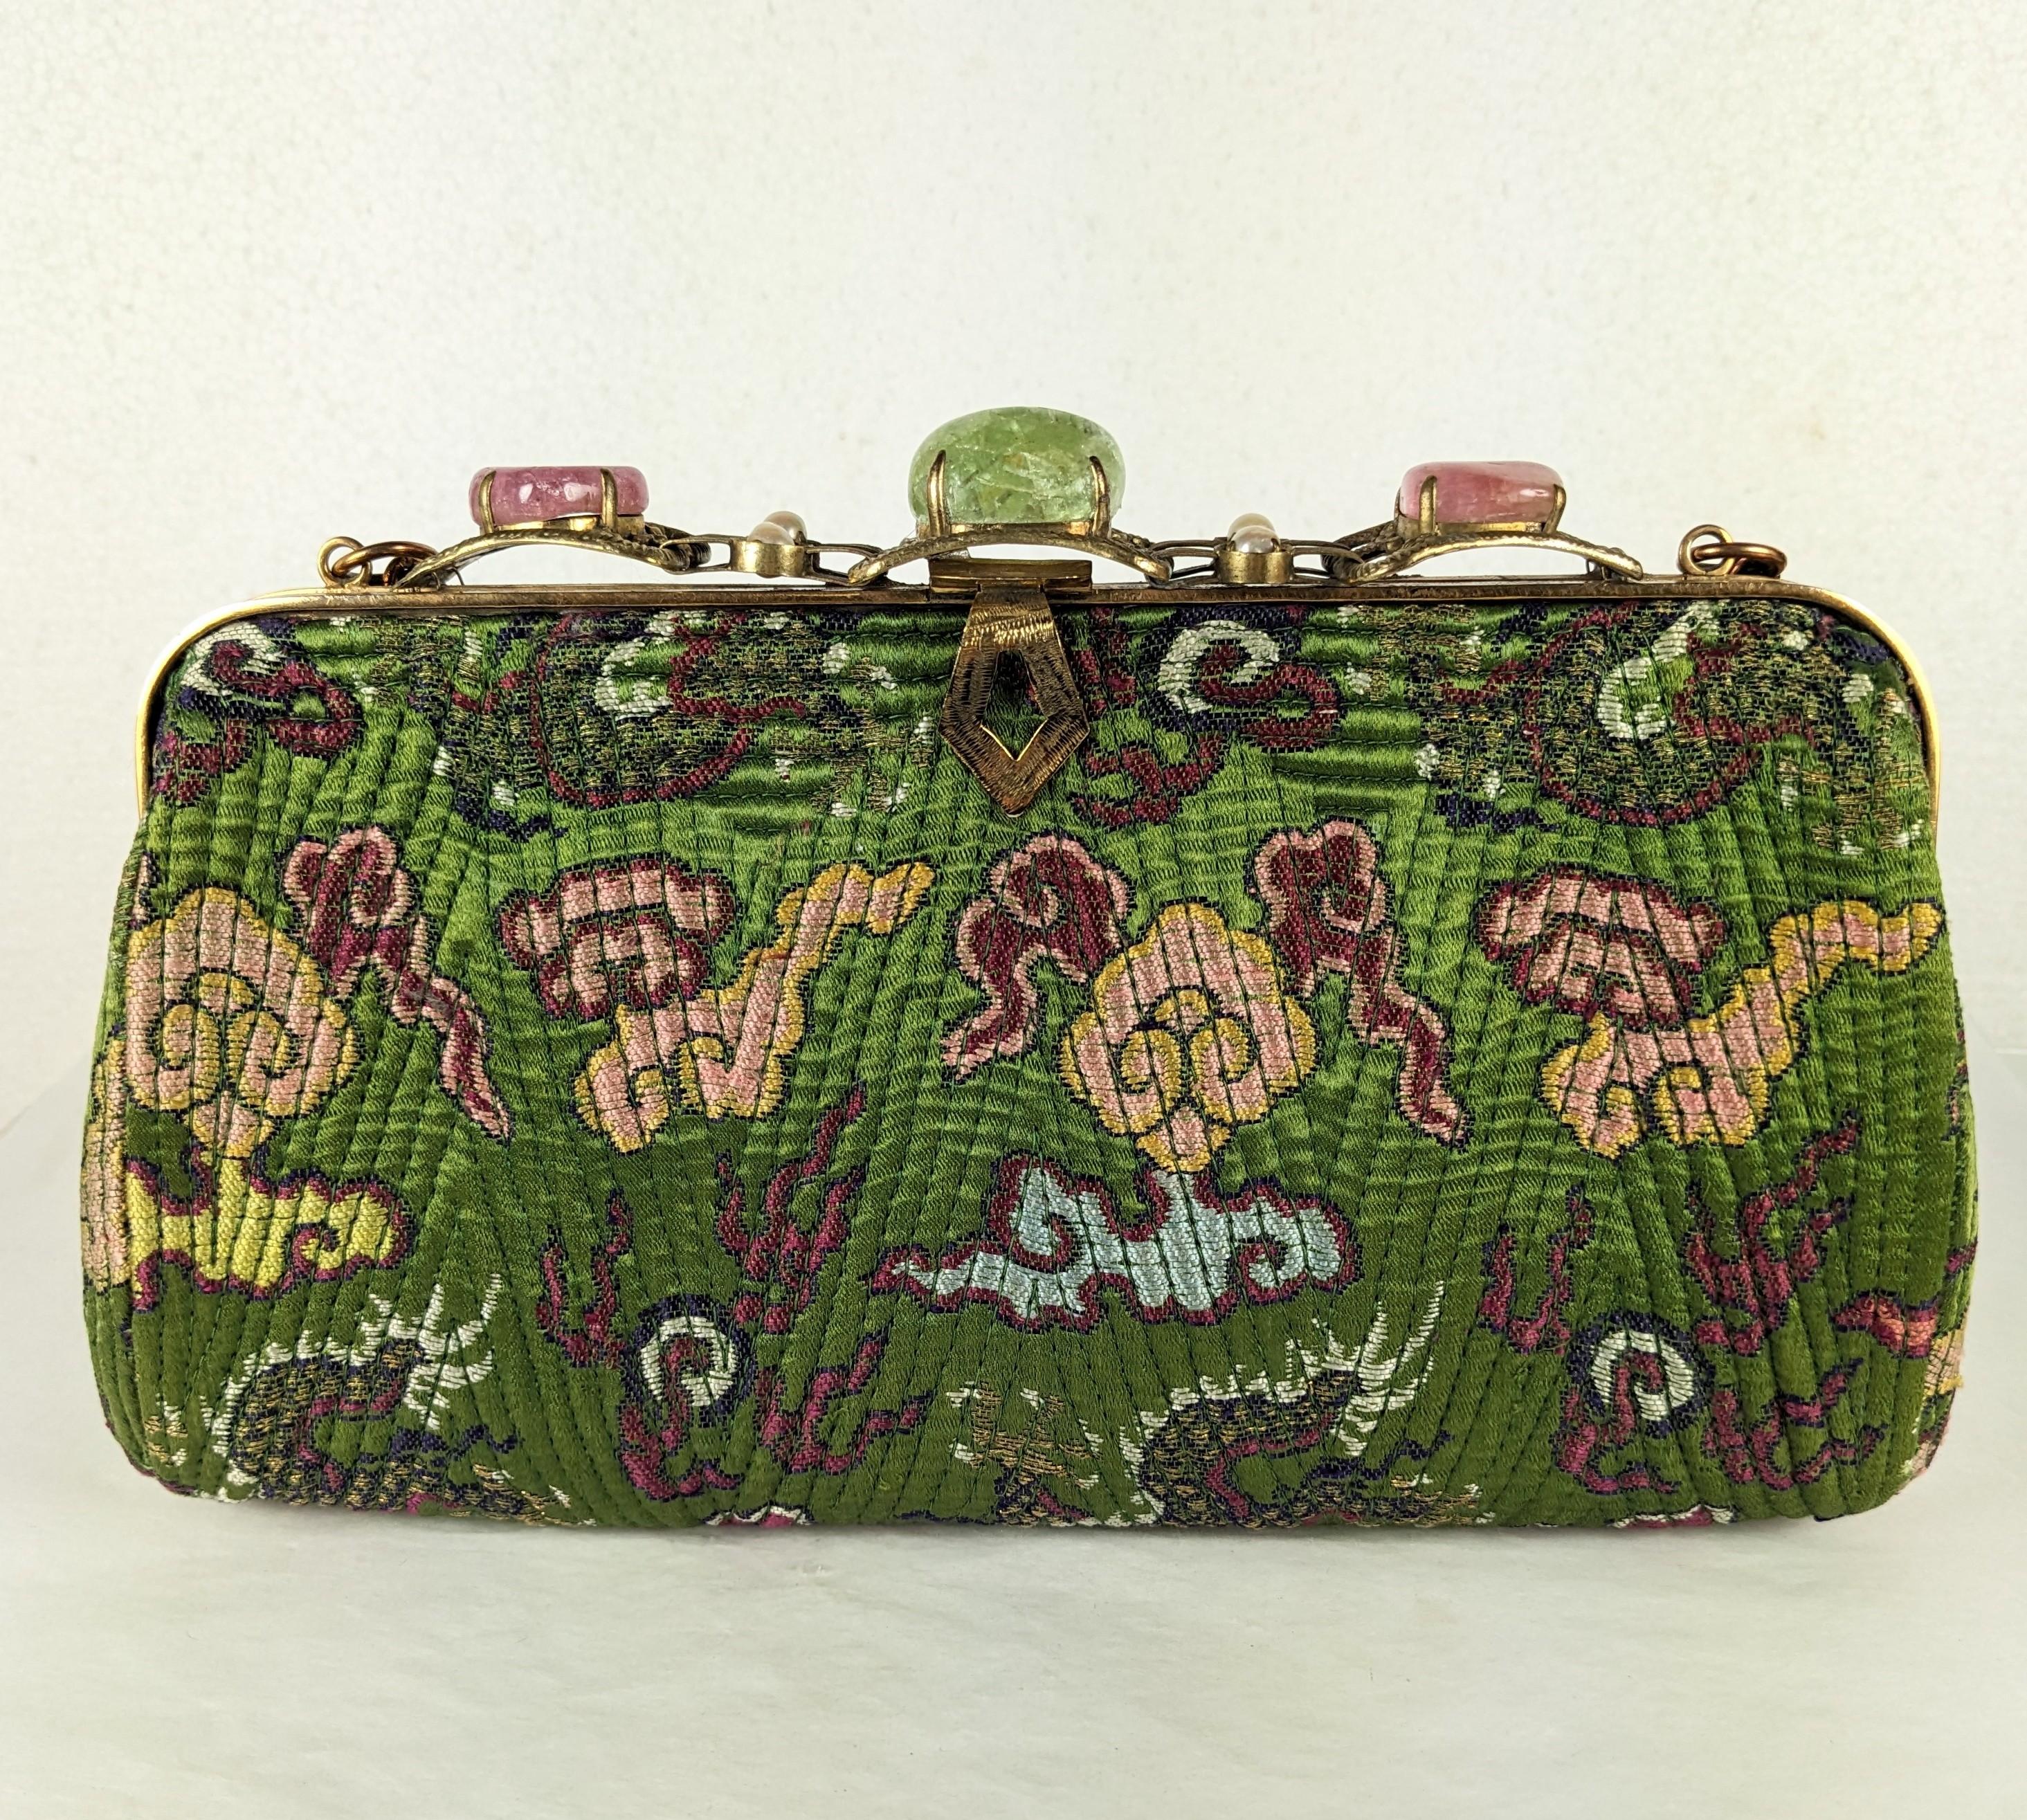 Amazing Art Deco Chinese Bag with Rose Quartz and Fluorite decoration. Antique quilted silk textile likely 19th Century reimagined into a long clutch form bag with long chain in the 1930's. The frame has a jeweled motif with tumbled rose quartz and